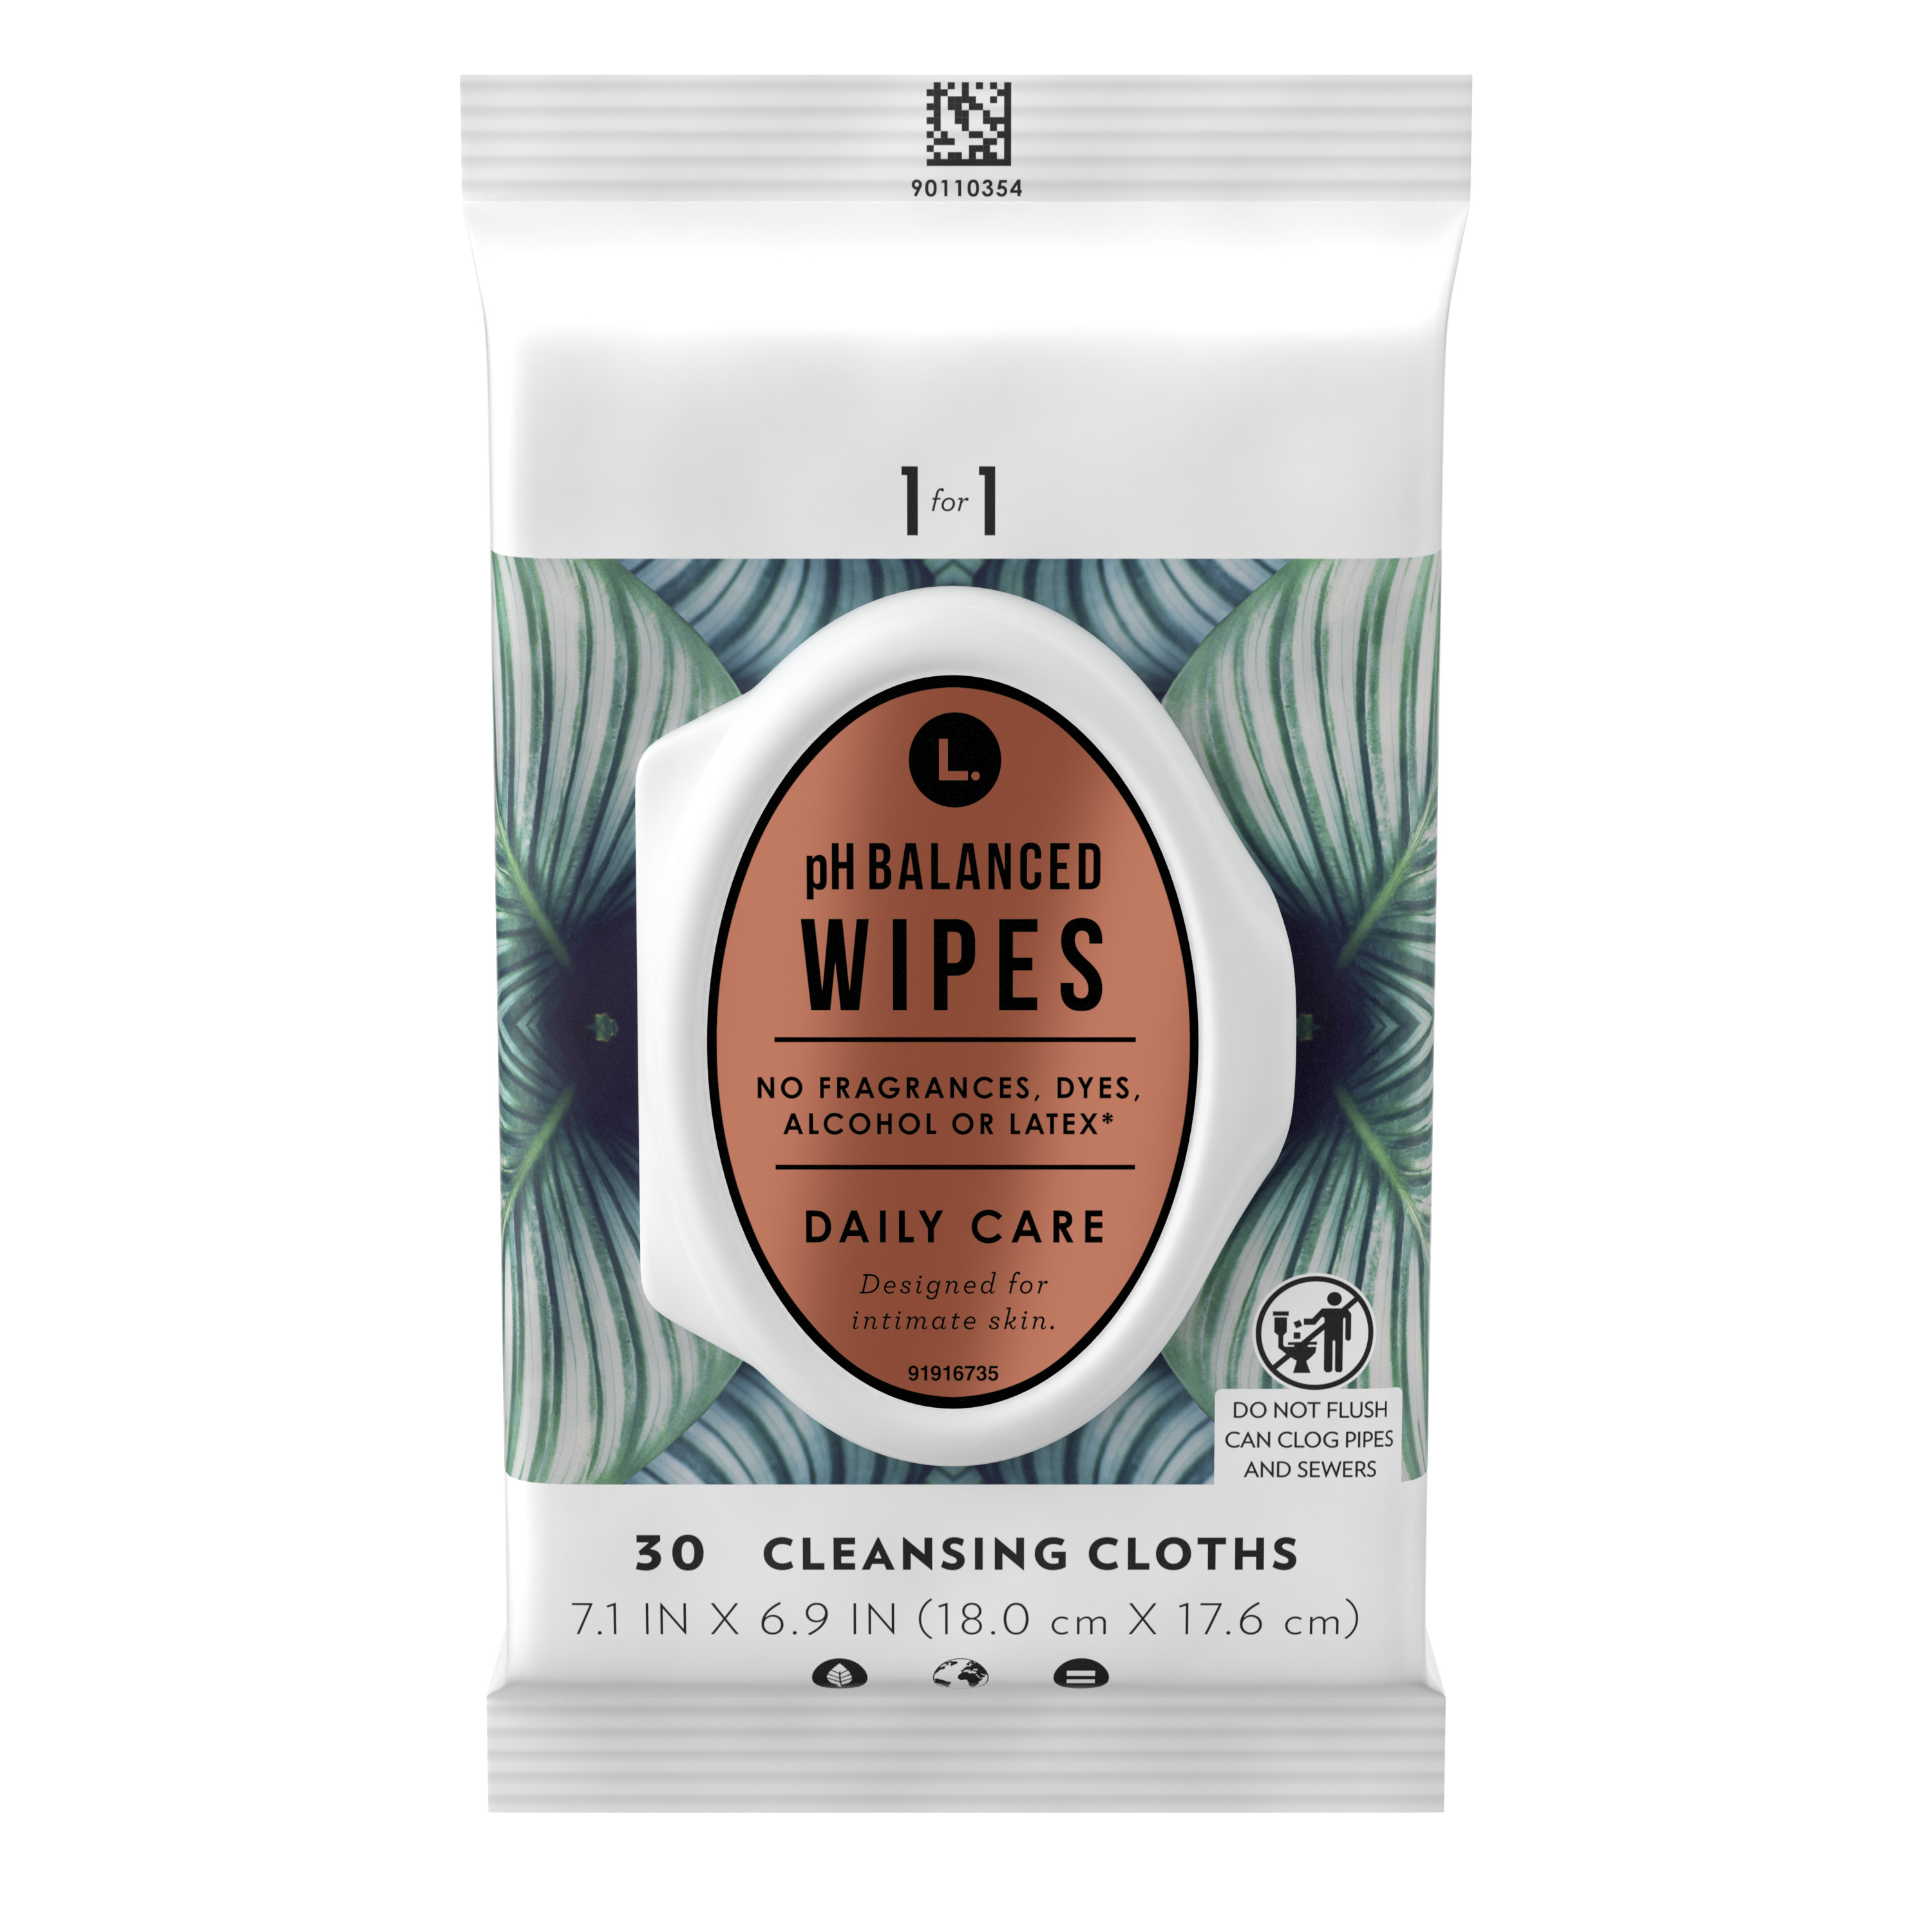 L. Fragrance Free Wipes, pH Balanced, Hypoallergenic, 30 Count - image 1 of 5